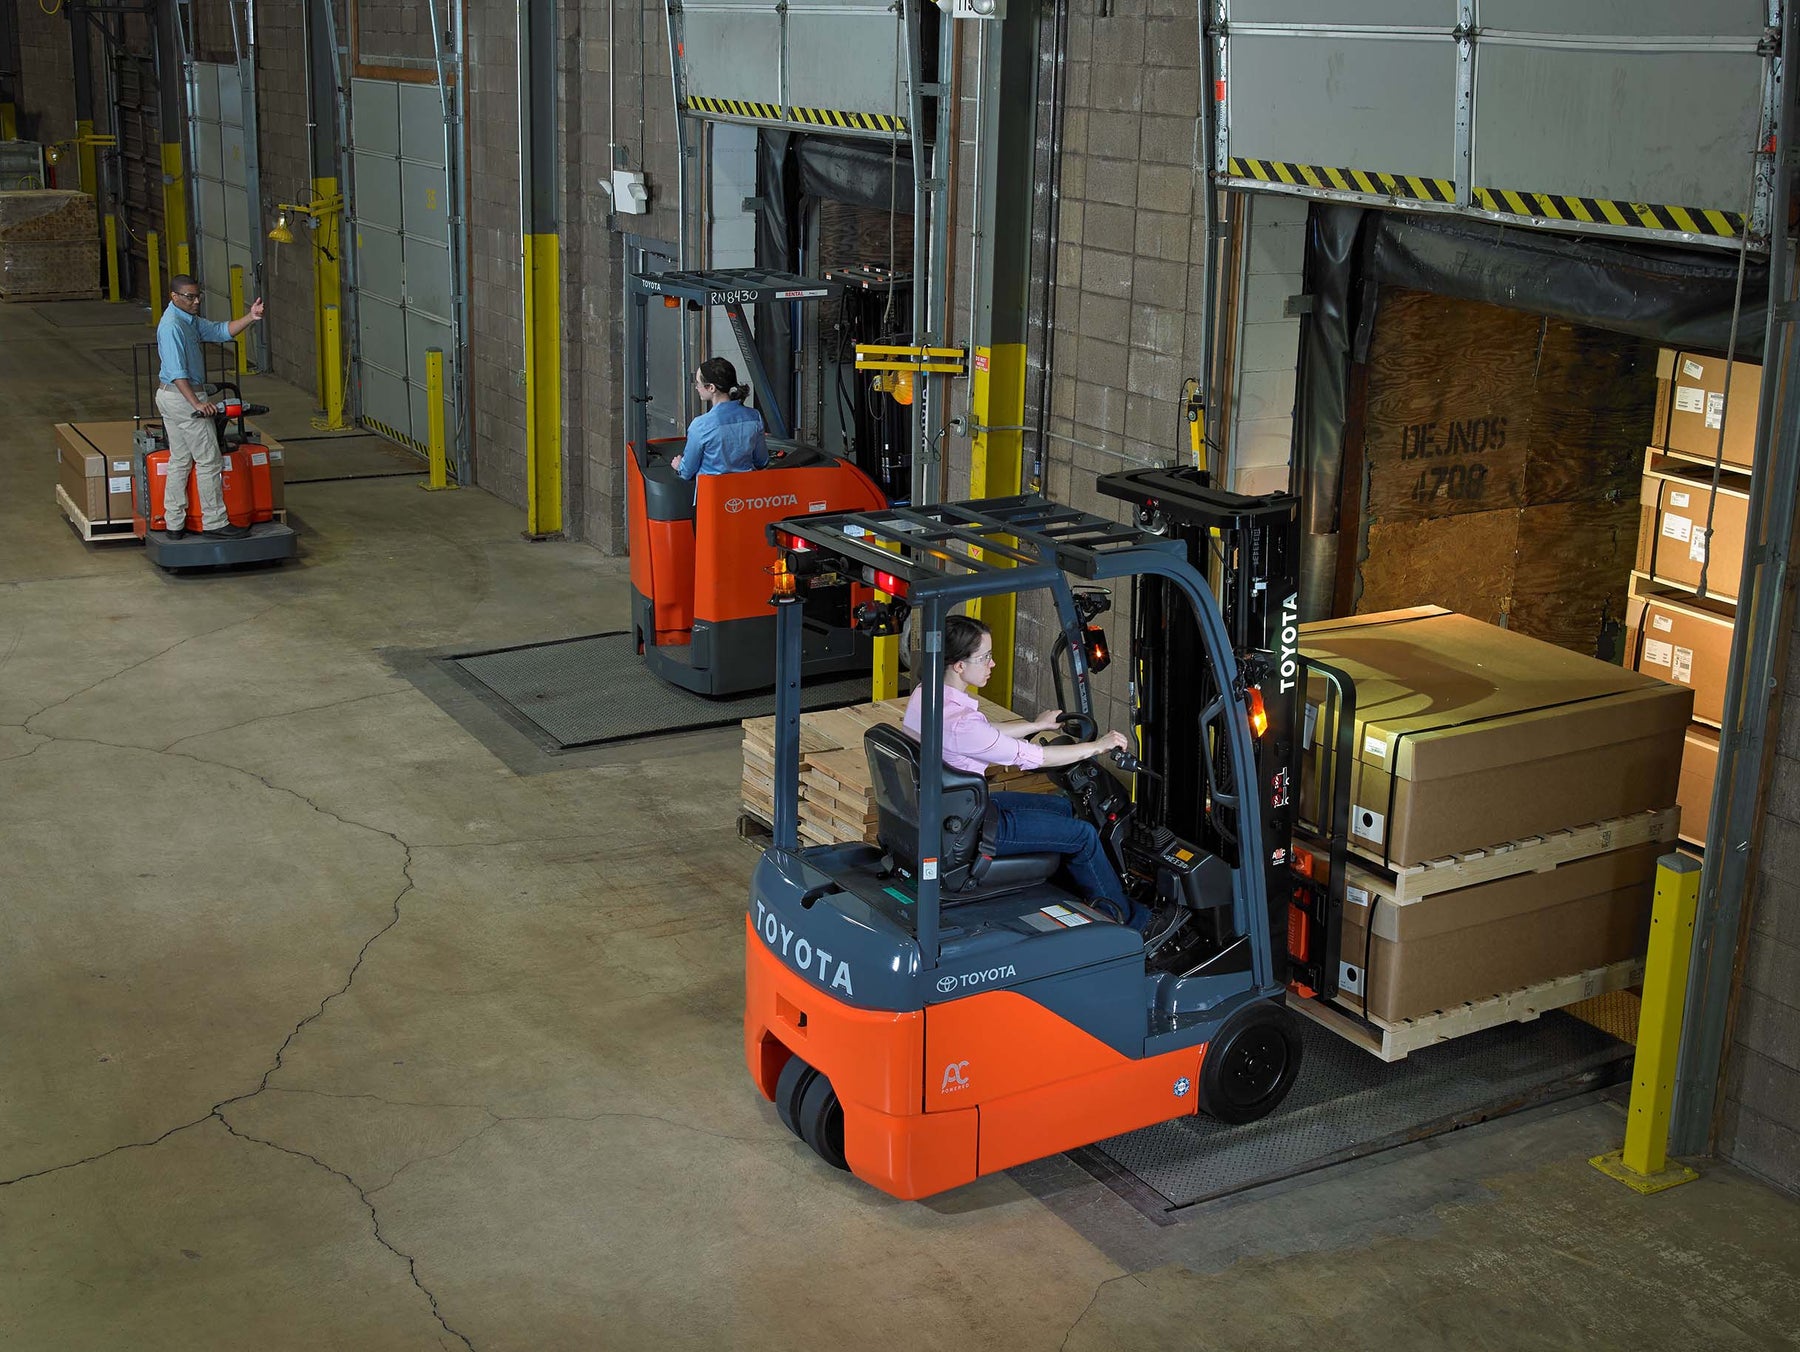 History of the Forklift: How Well Do You Know It?